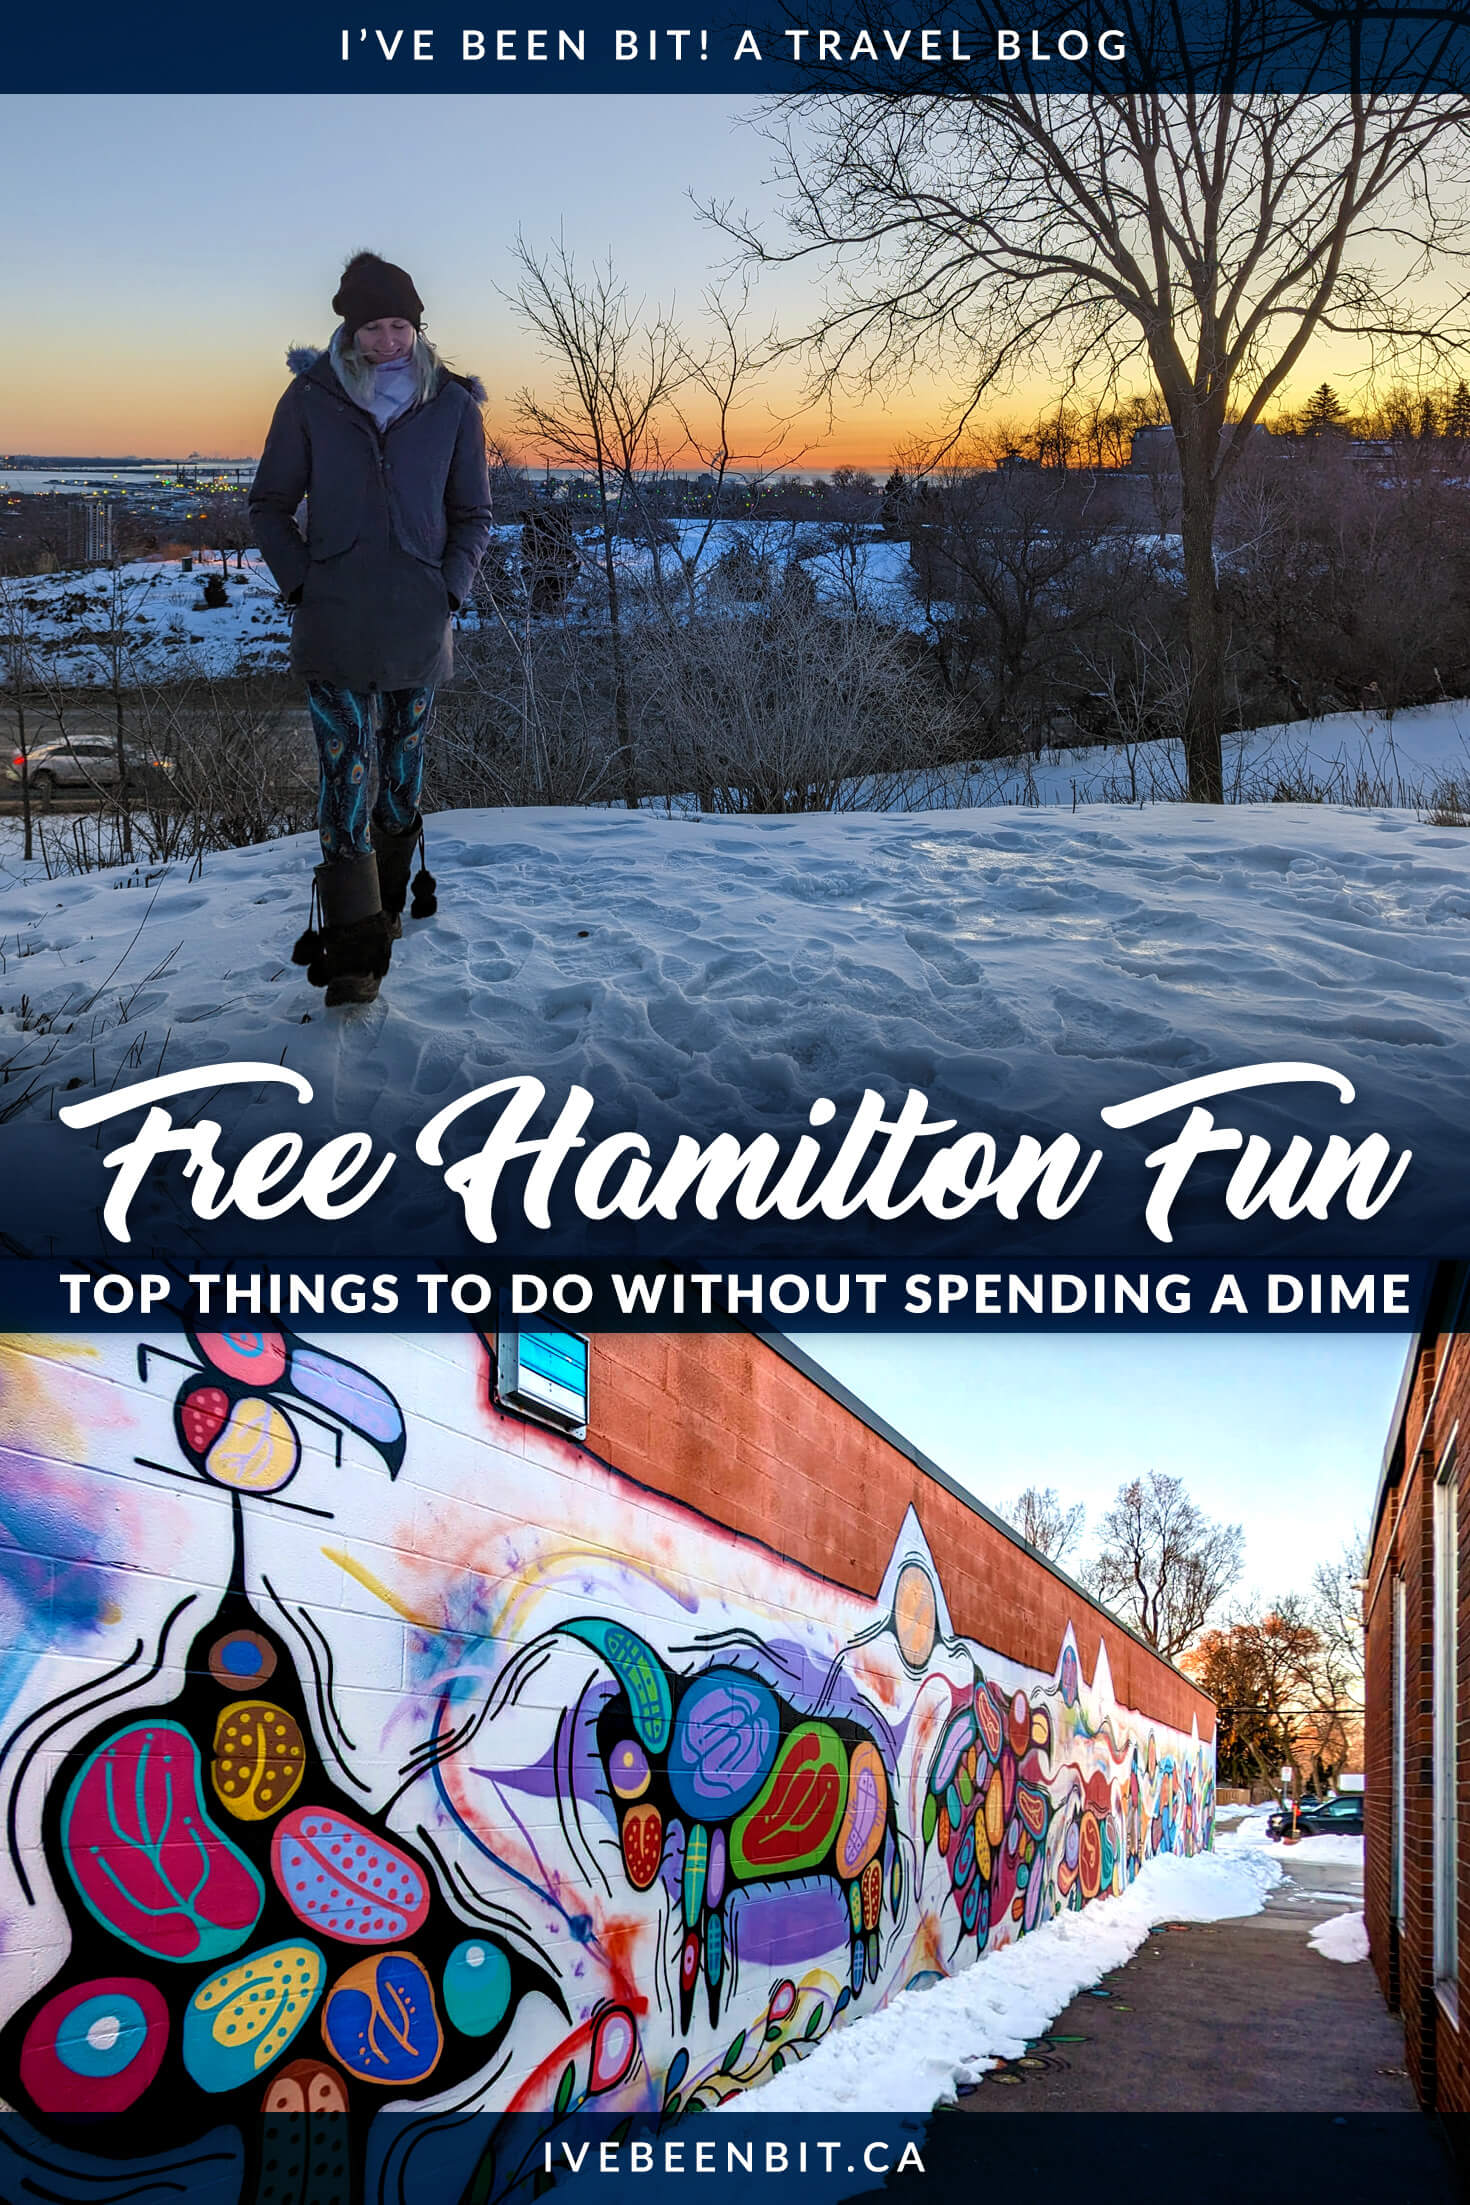 Top Free Things to Do in Hamilton Ontario Canada | Things to Do in Ontario Canada | Travel Guide to Hamilton Ontario | Weekend Getaways in Ontario | Where to Go in Ontario | Day Trips from Toronto | Ontario Hiking | Hiking in Ontario | Hamilton Hiking Trails | Hamilton Art Galleries | Hamilton Parks | Hamilton Street Art | Ontario Street Art | Street Art in Ontario | Explore Ontario | Ontario Travel | #Canada #Ontario #Hamilton | IveBeenBit.ca